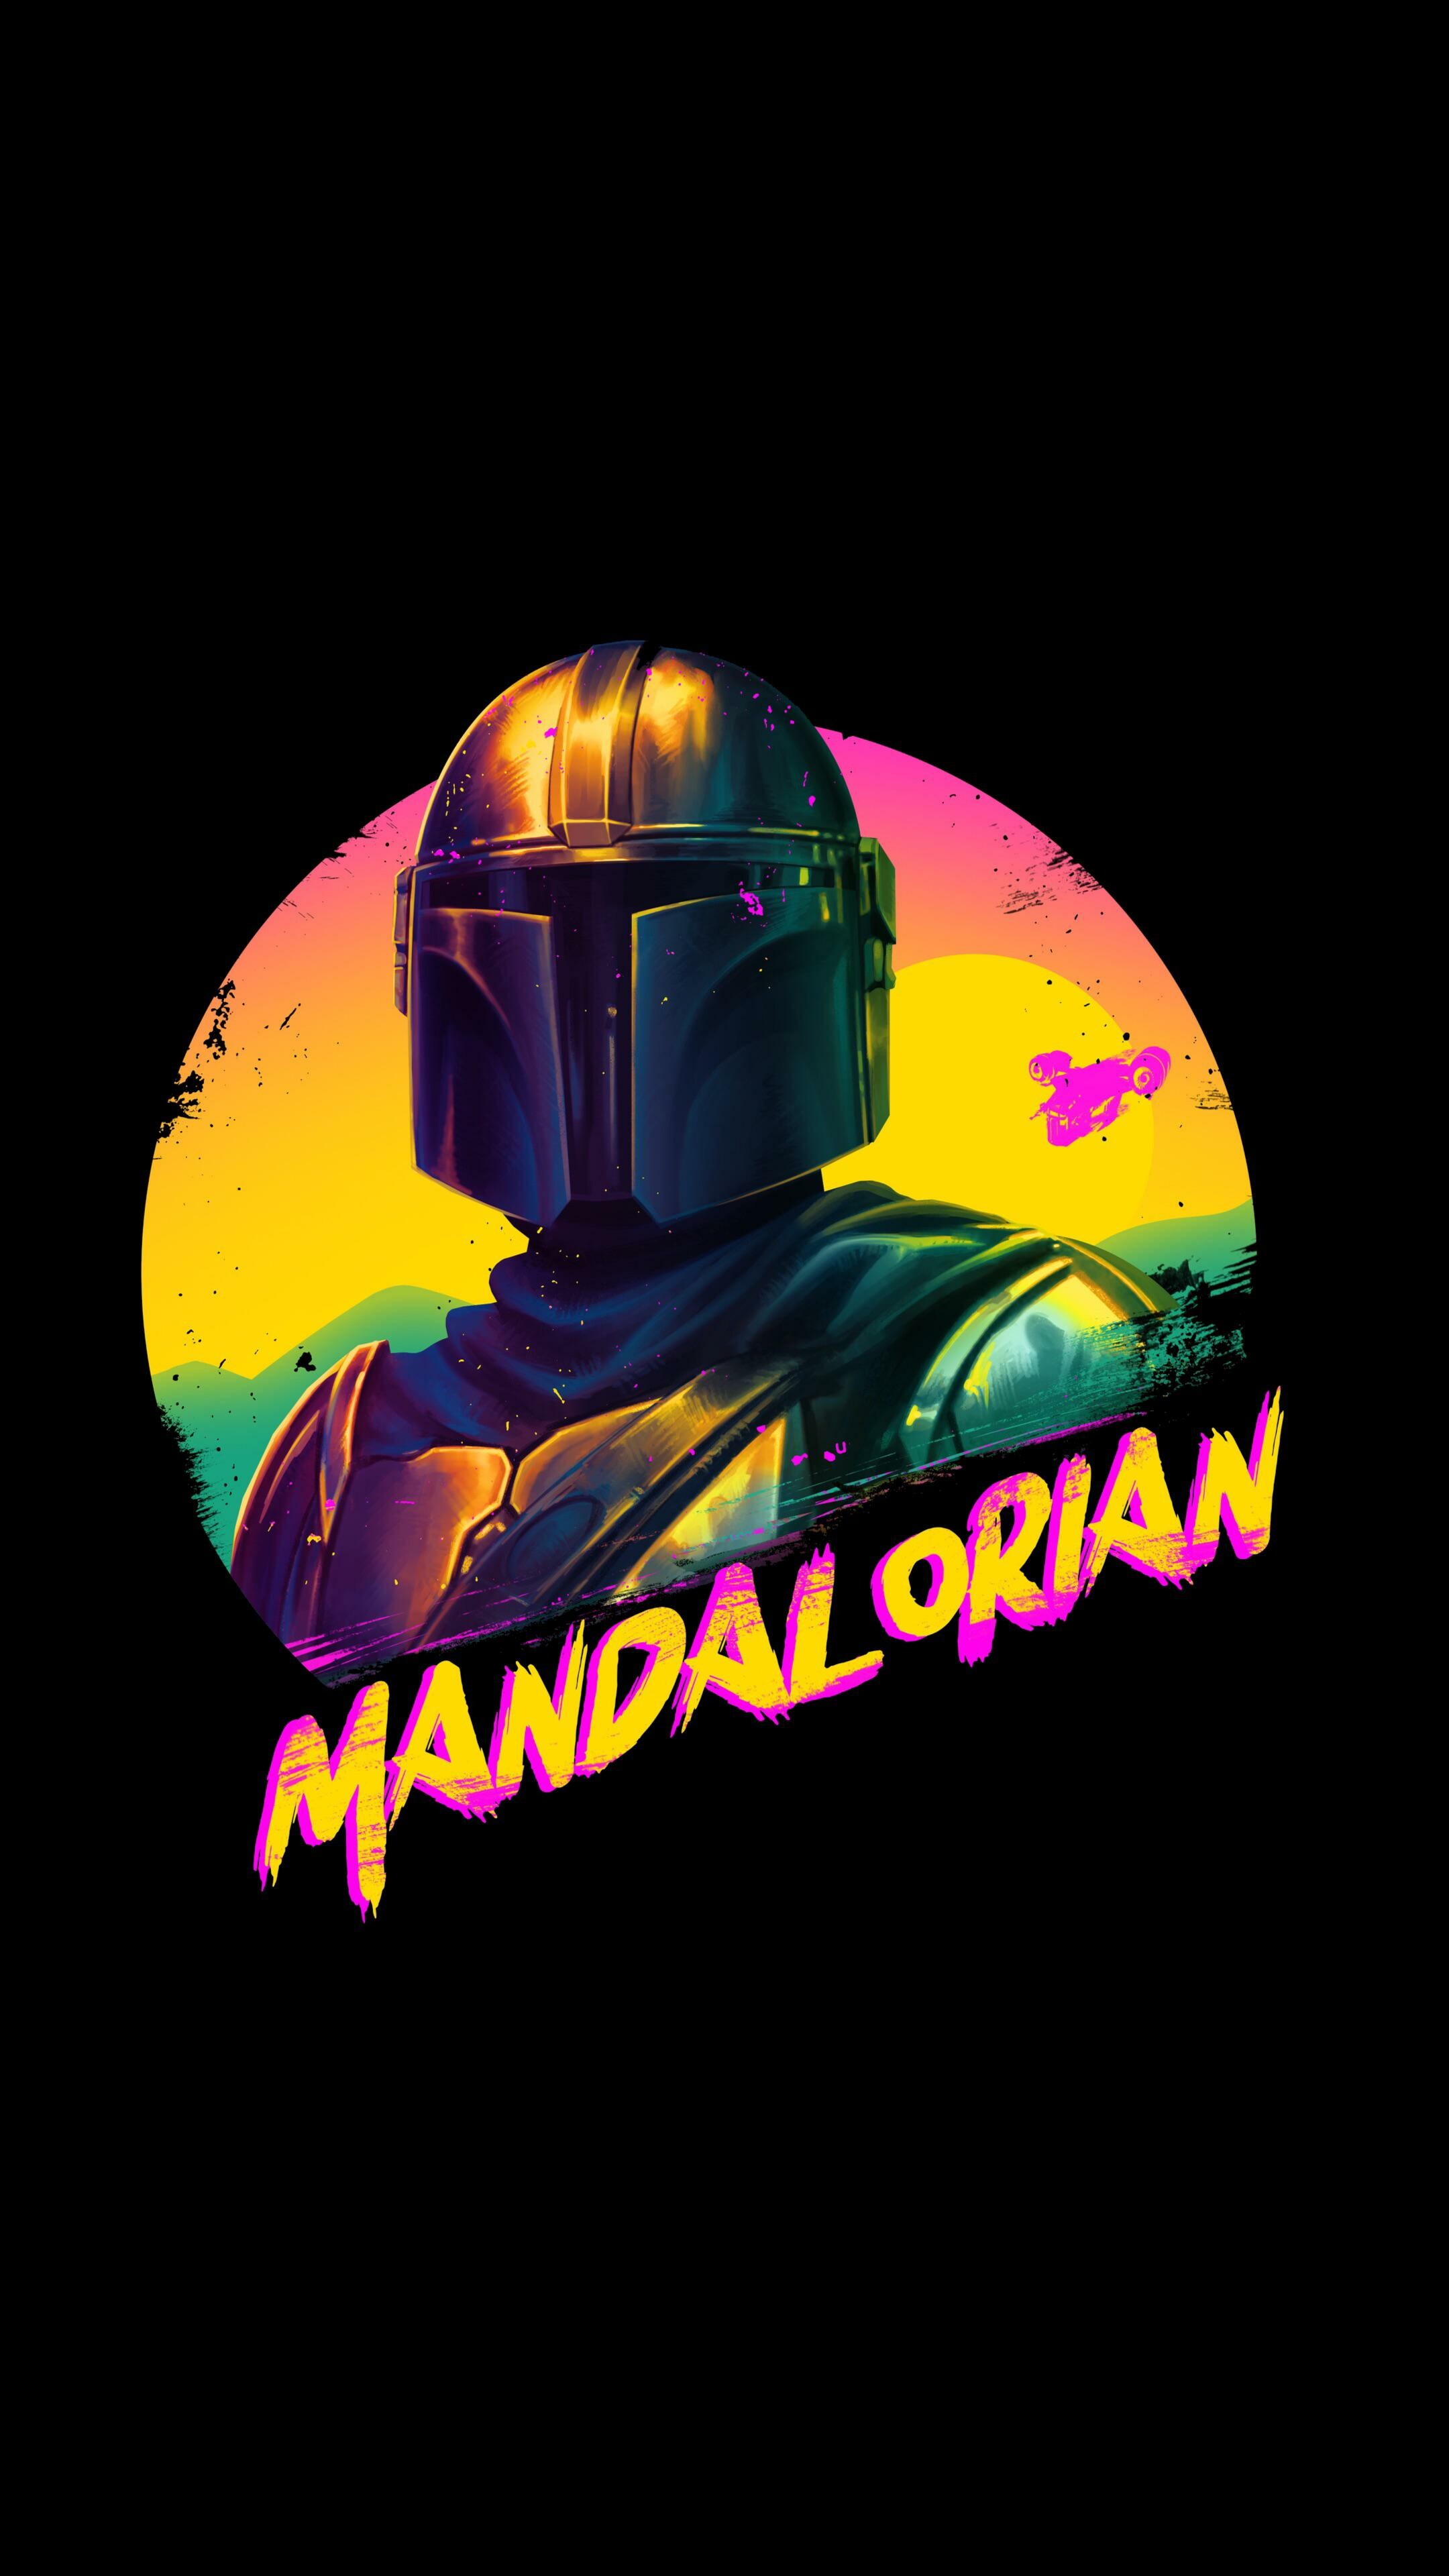 The Mandalorian: A fictional character in the Star Wars franchise, Poster. 2160x3840 4K Wallpaper.